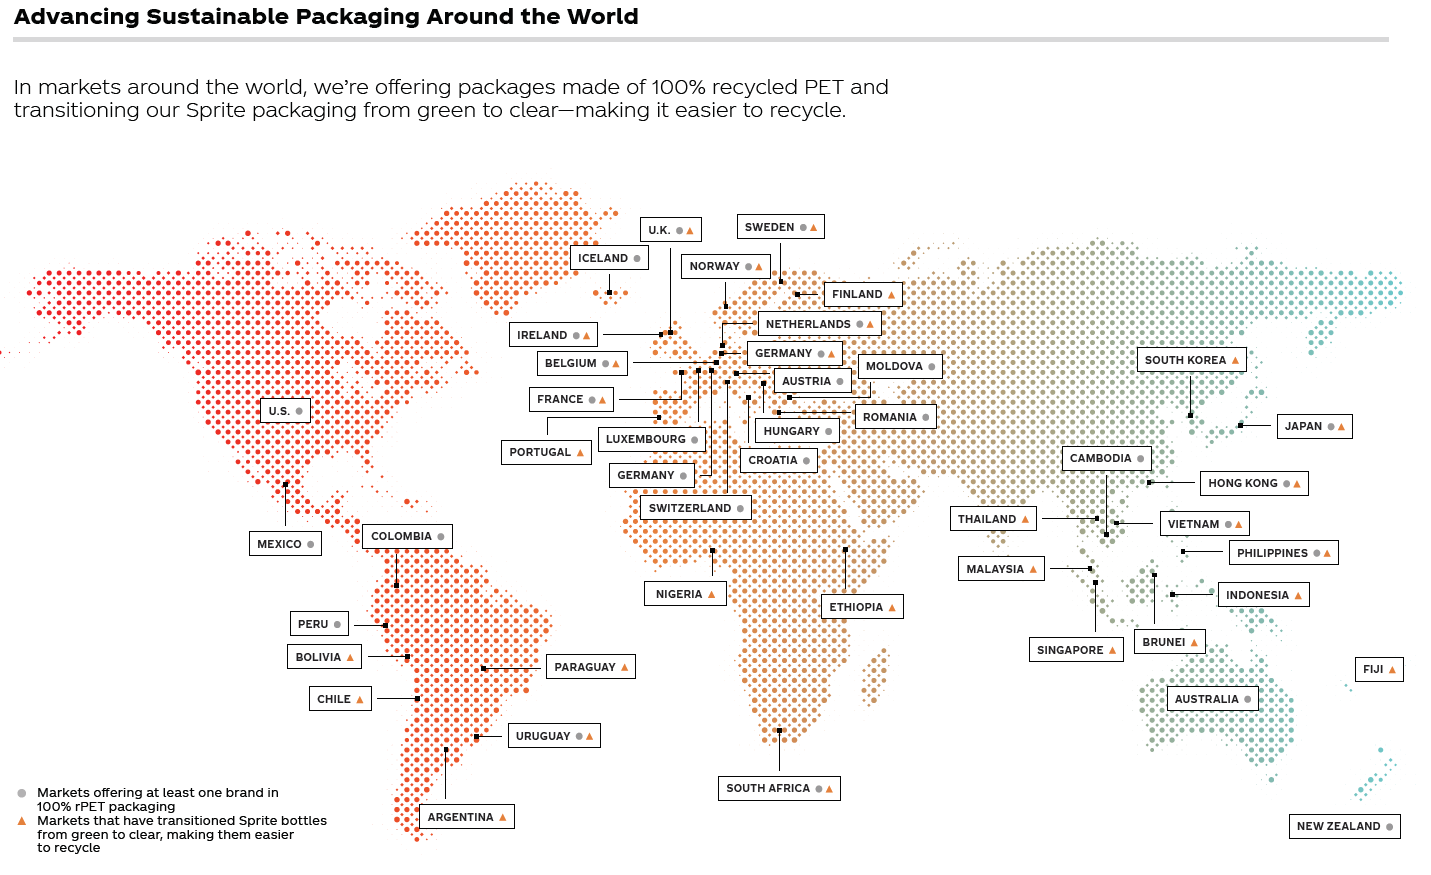 Chart outlining The Coca-Cola Company's advancement of sustainable packaging around the world